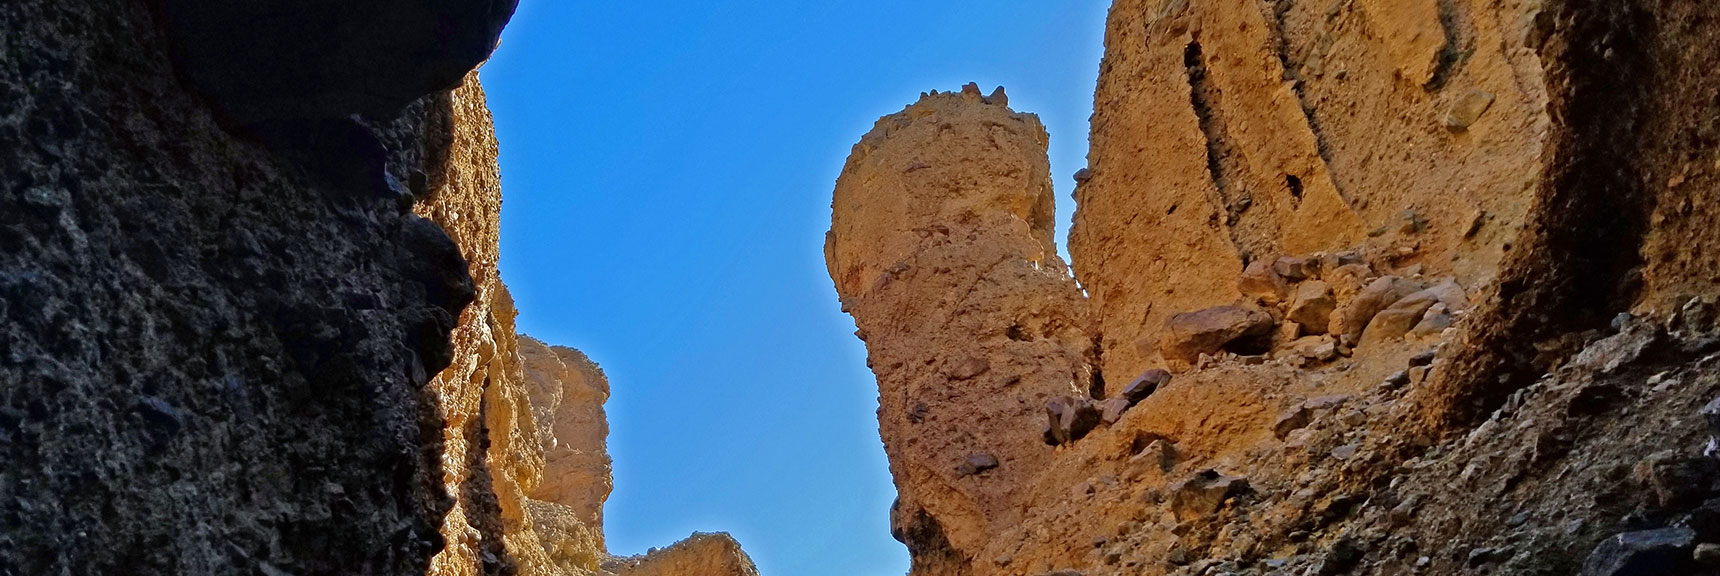 Rim of Second Slot Marked by Artistic Pillars | Sidewinder Canyon | Death Valley National Park, California